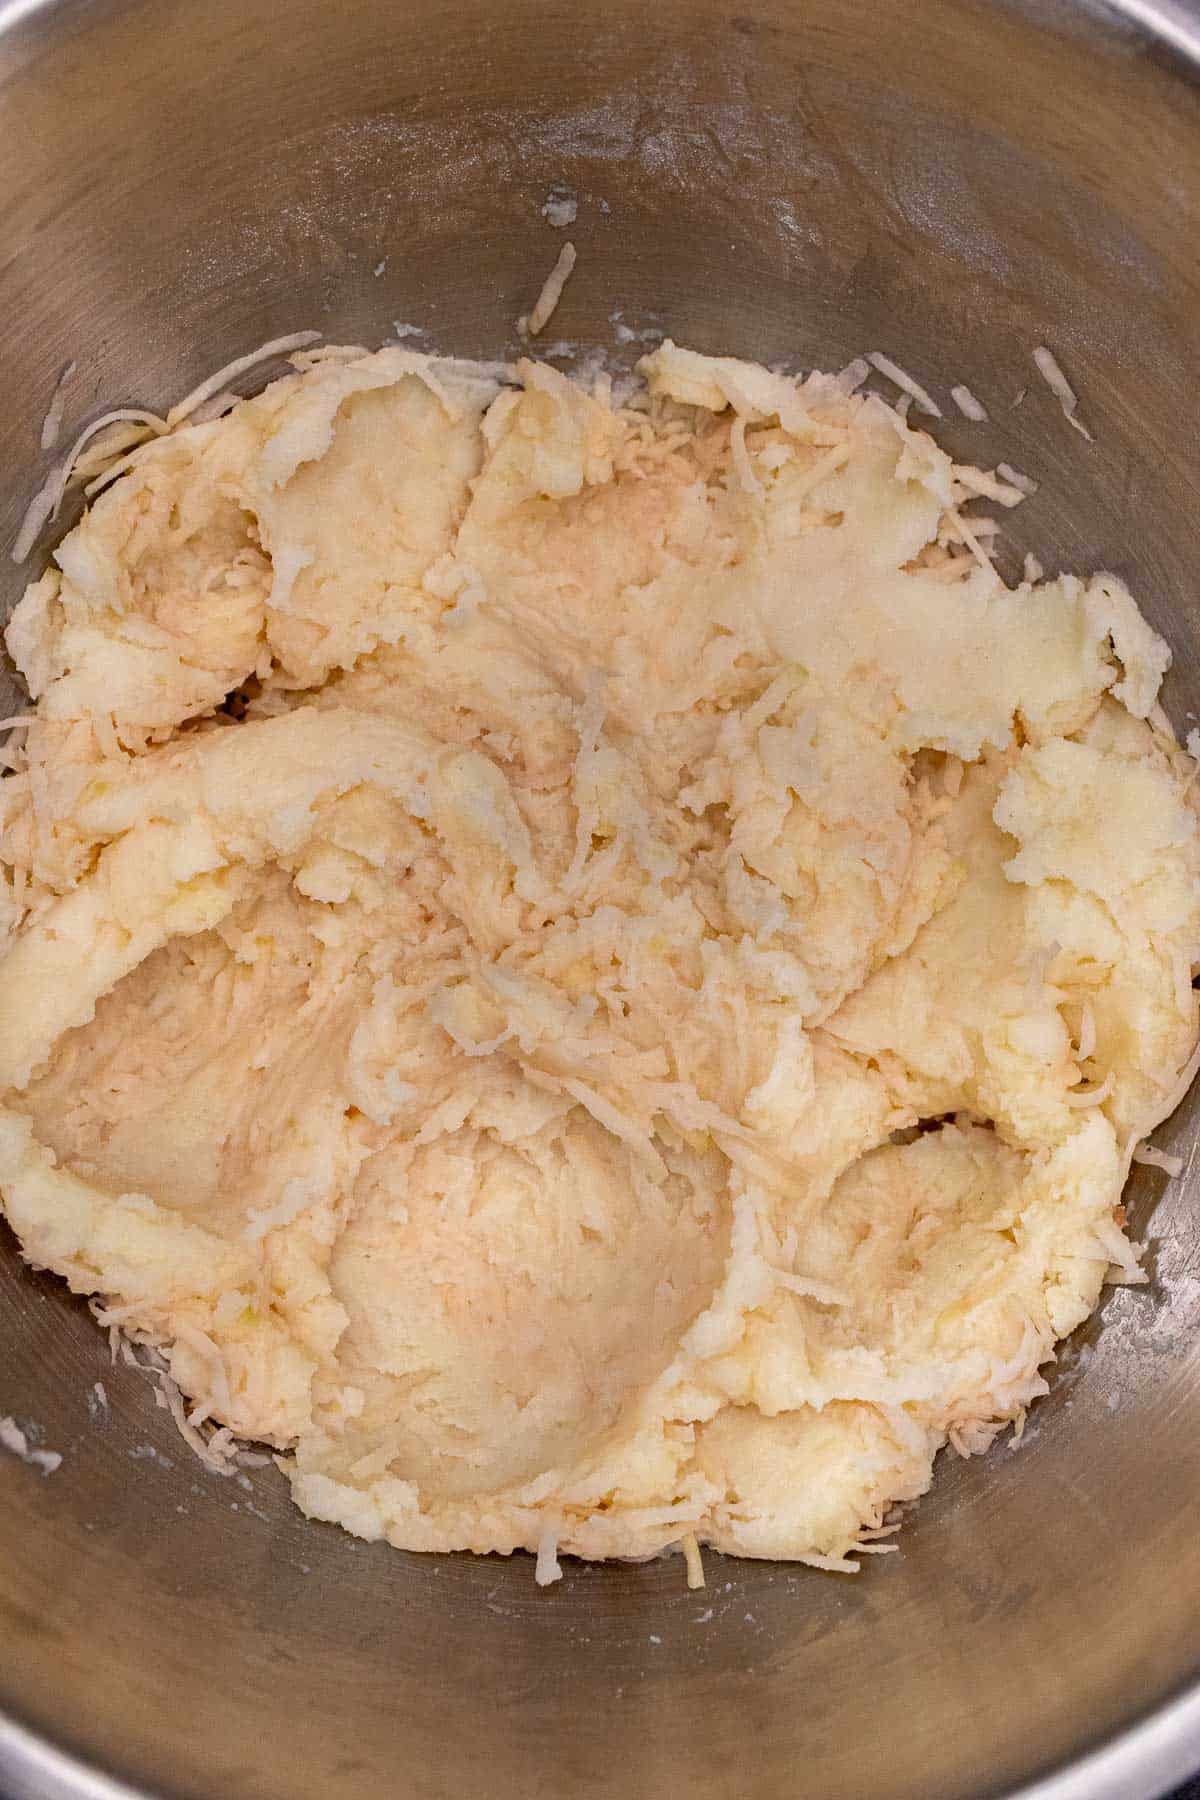 Raw, shredded potato mixed into mashed potatoes for making Boxty.